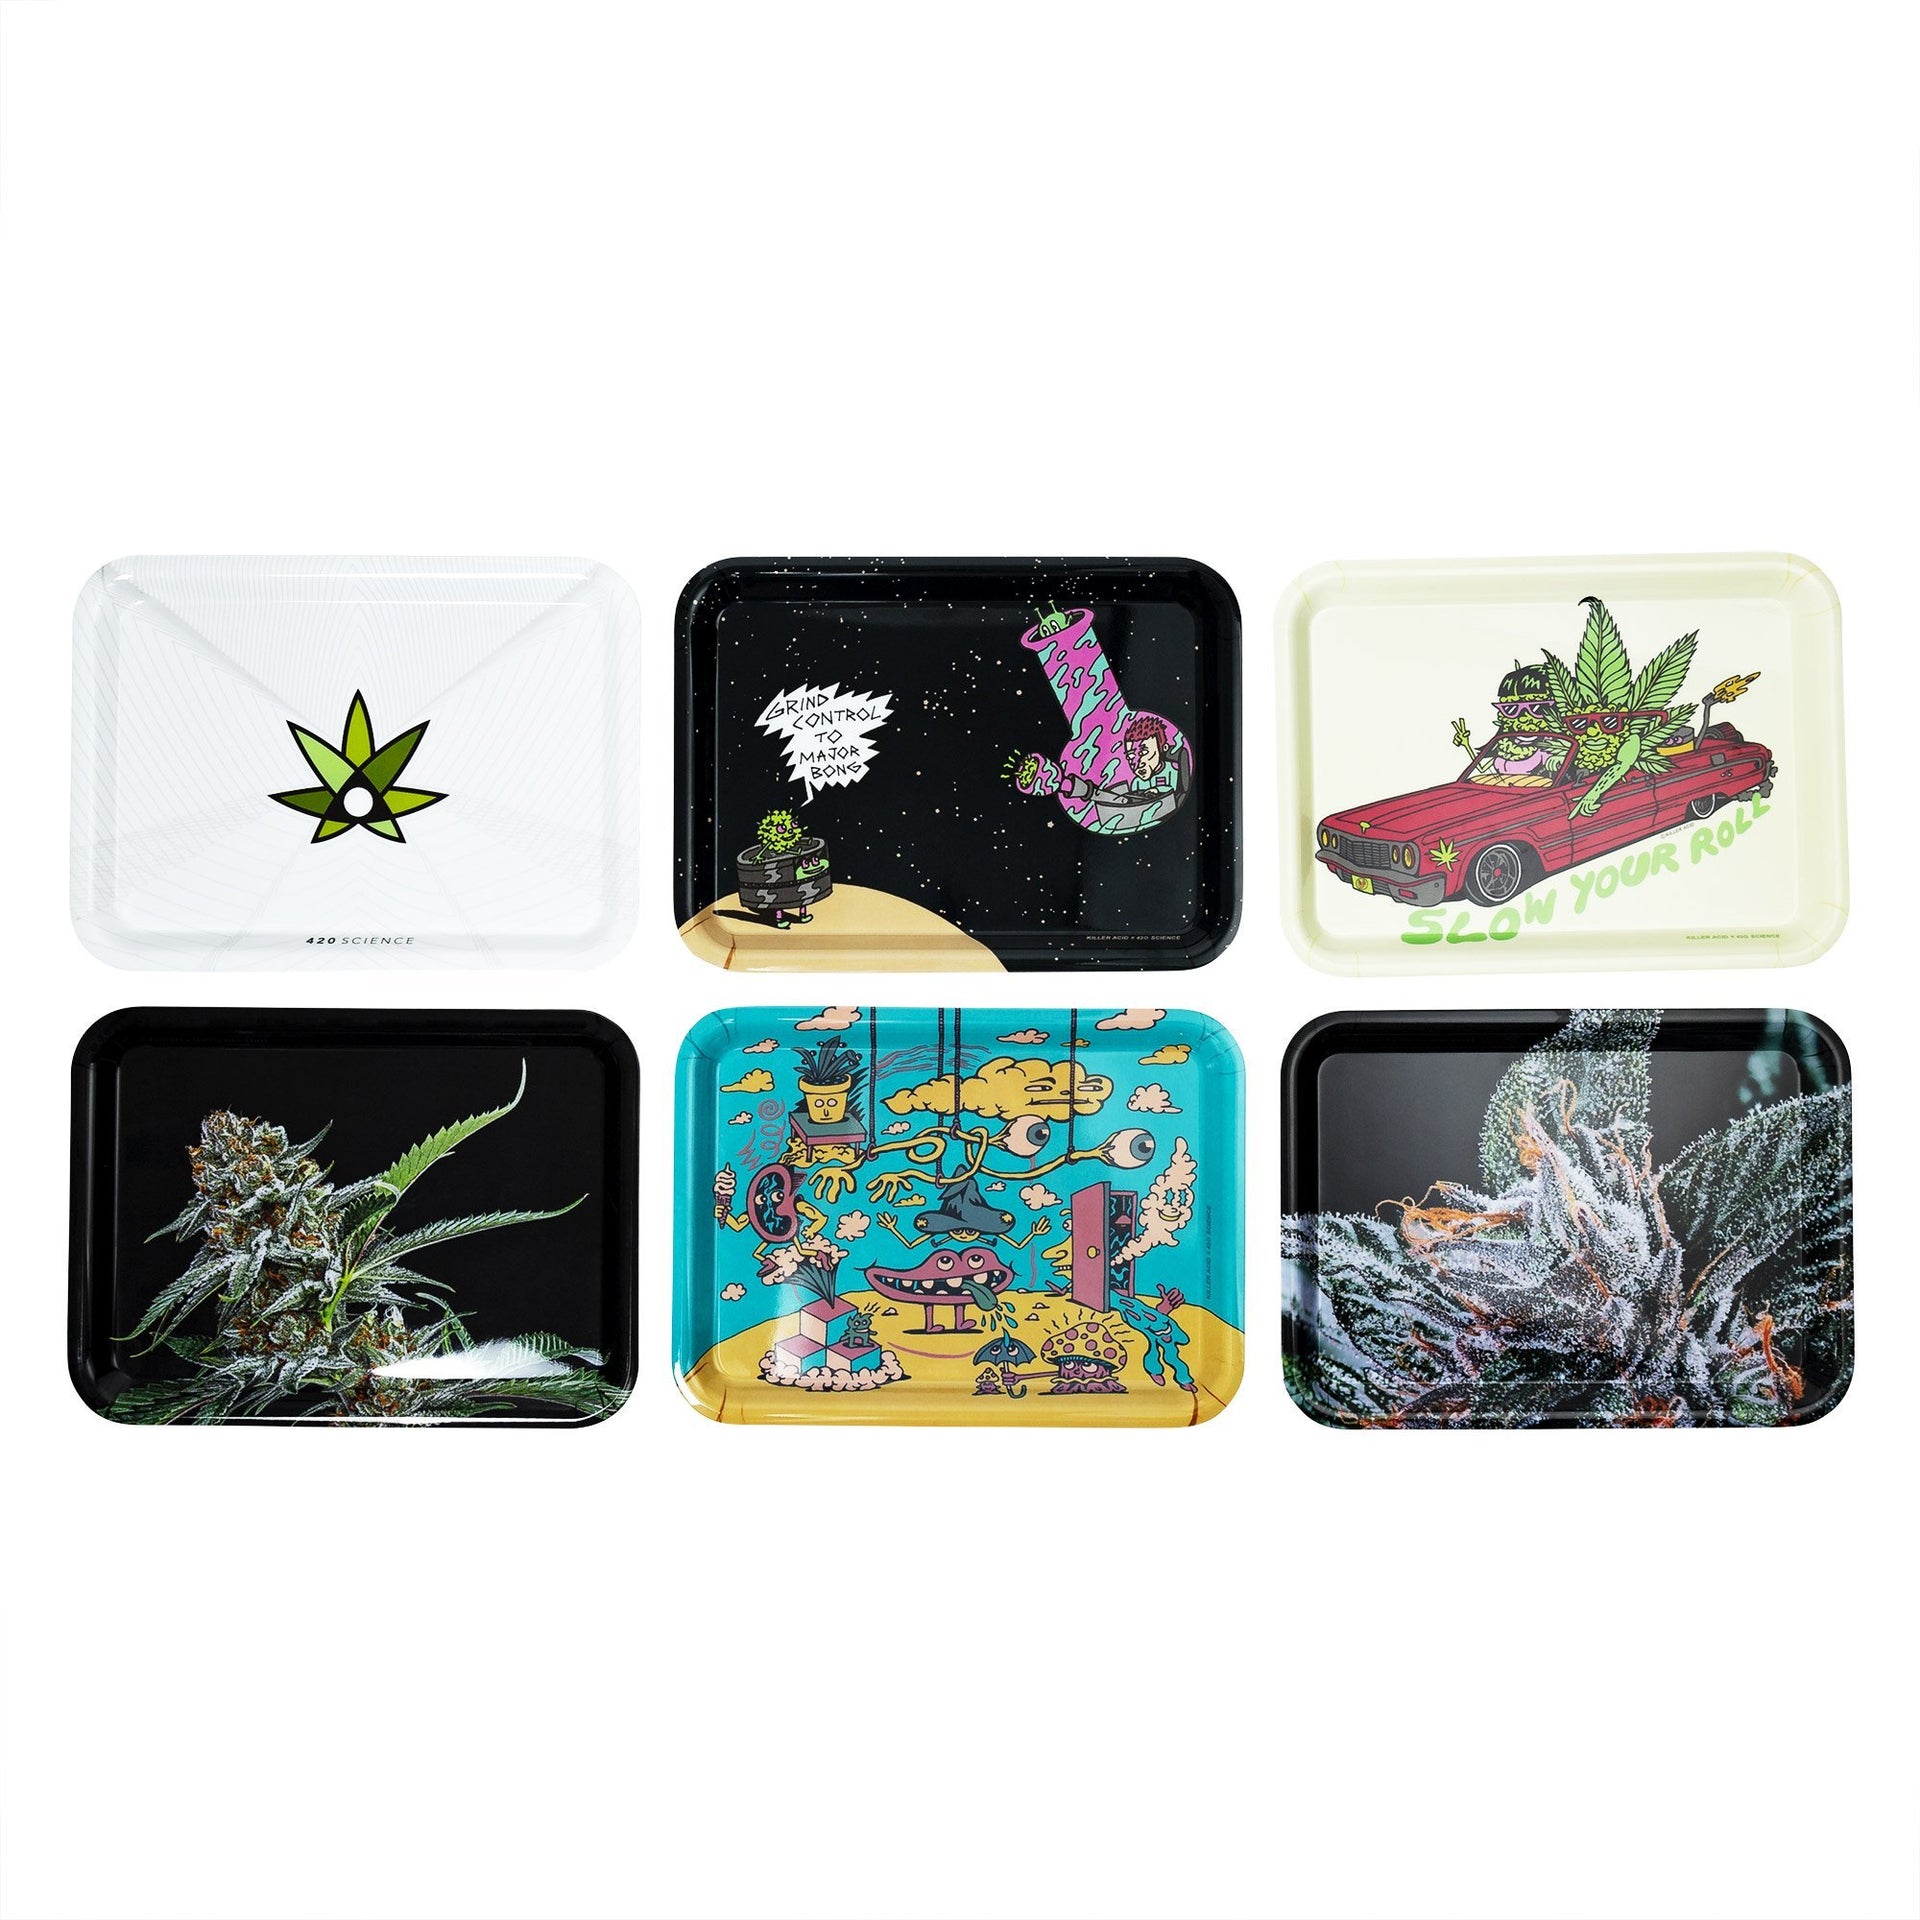 Rolling Tray - High Way 420 - Bad Annies